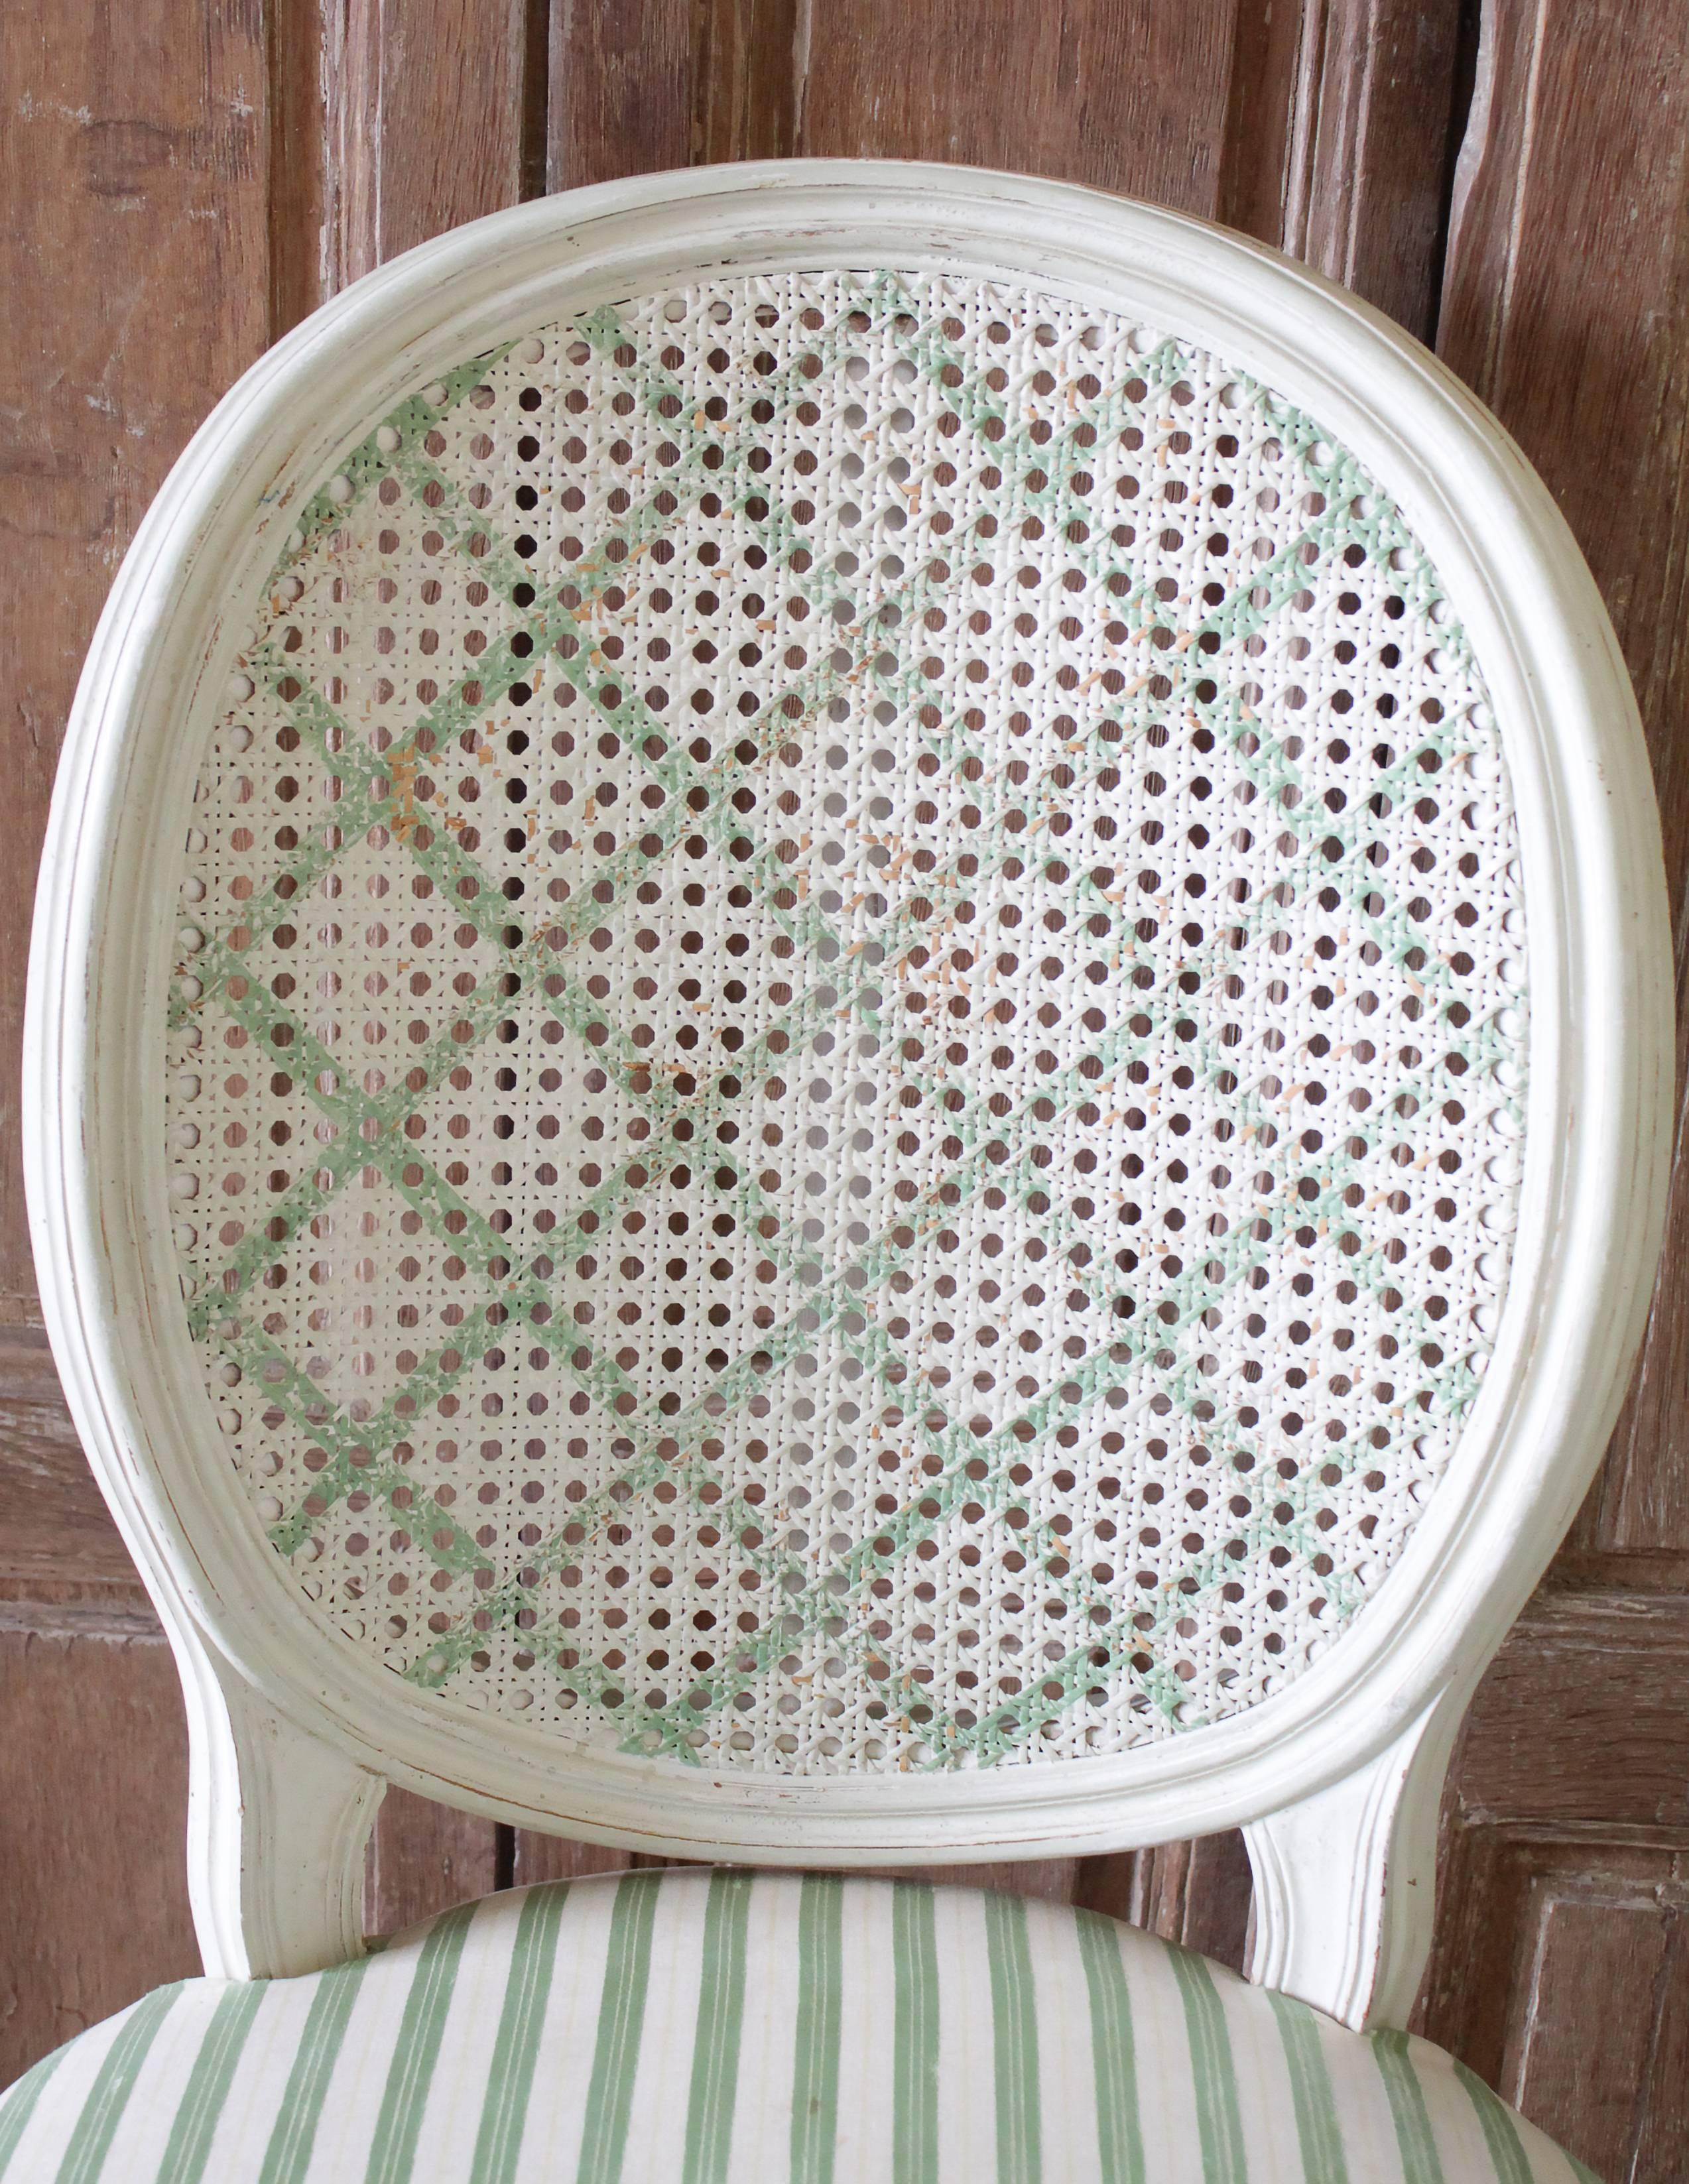 Set of four Louis XVI style French painted cane back dining chairs
Original painted finish, in an off white with a pretty garden green colored painted lattice pattern on the cane backs. Very solid and sturdy, the chairs will just need to be